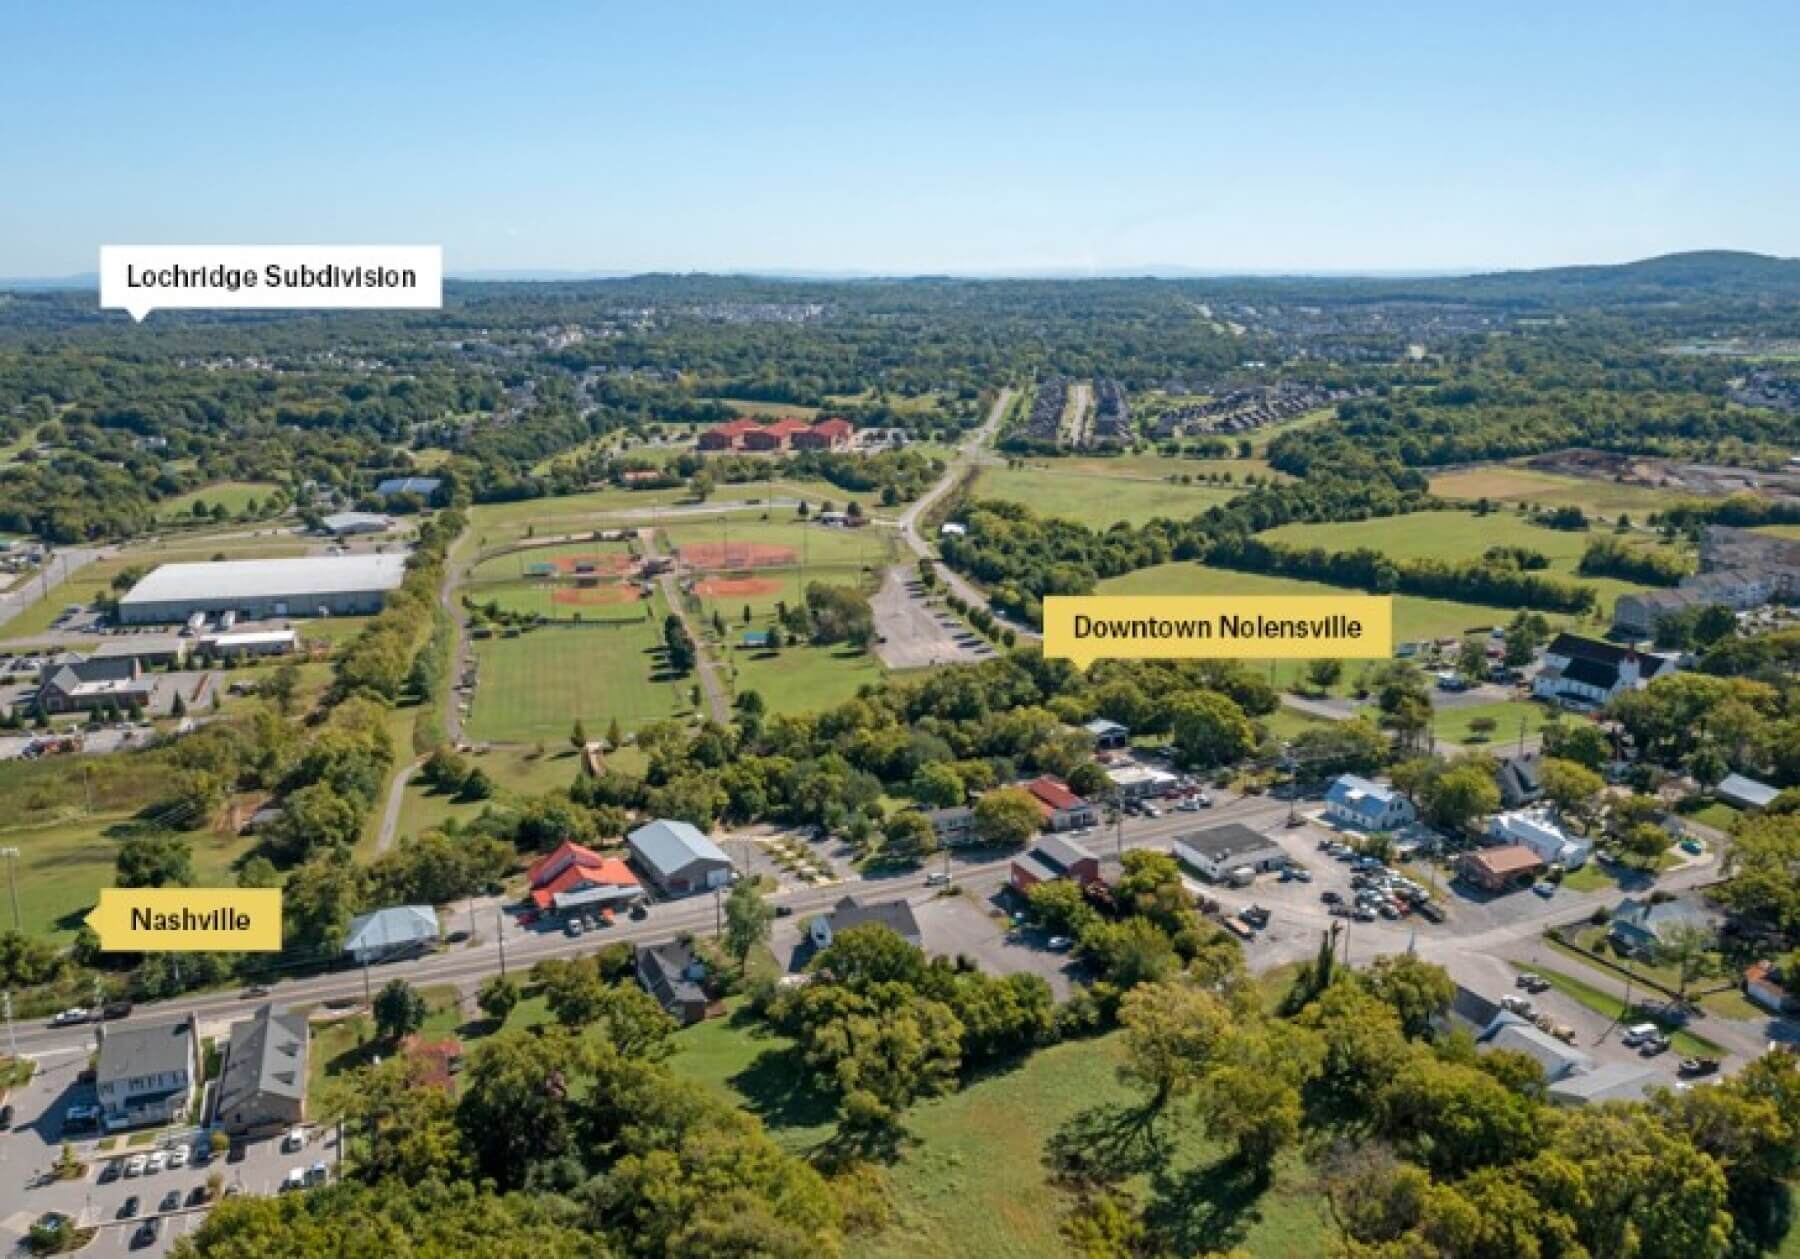 an aerial shot with labels showing the relationship with Nashville